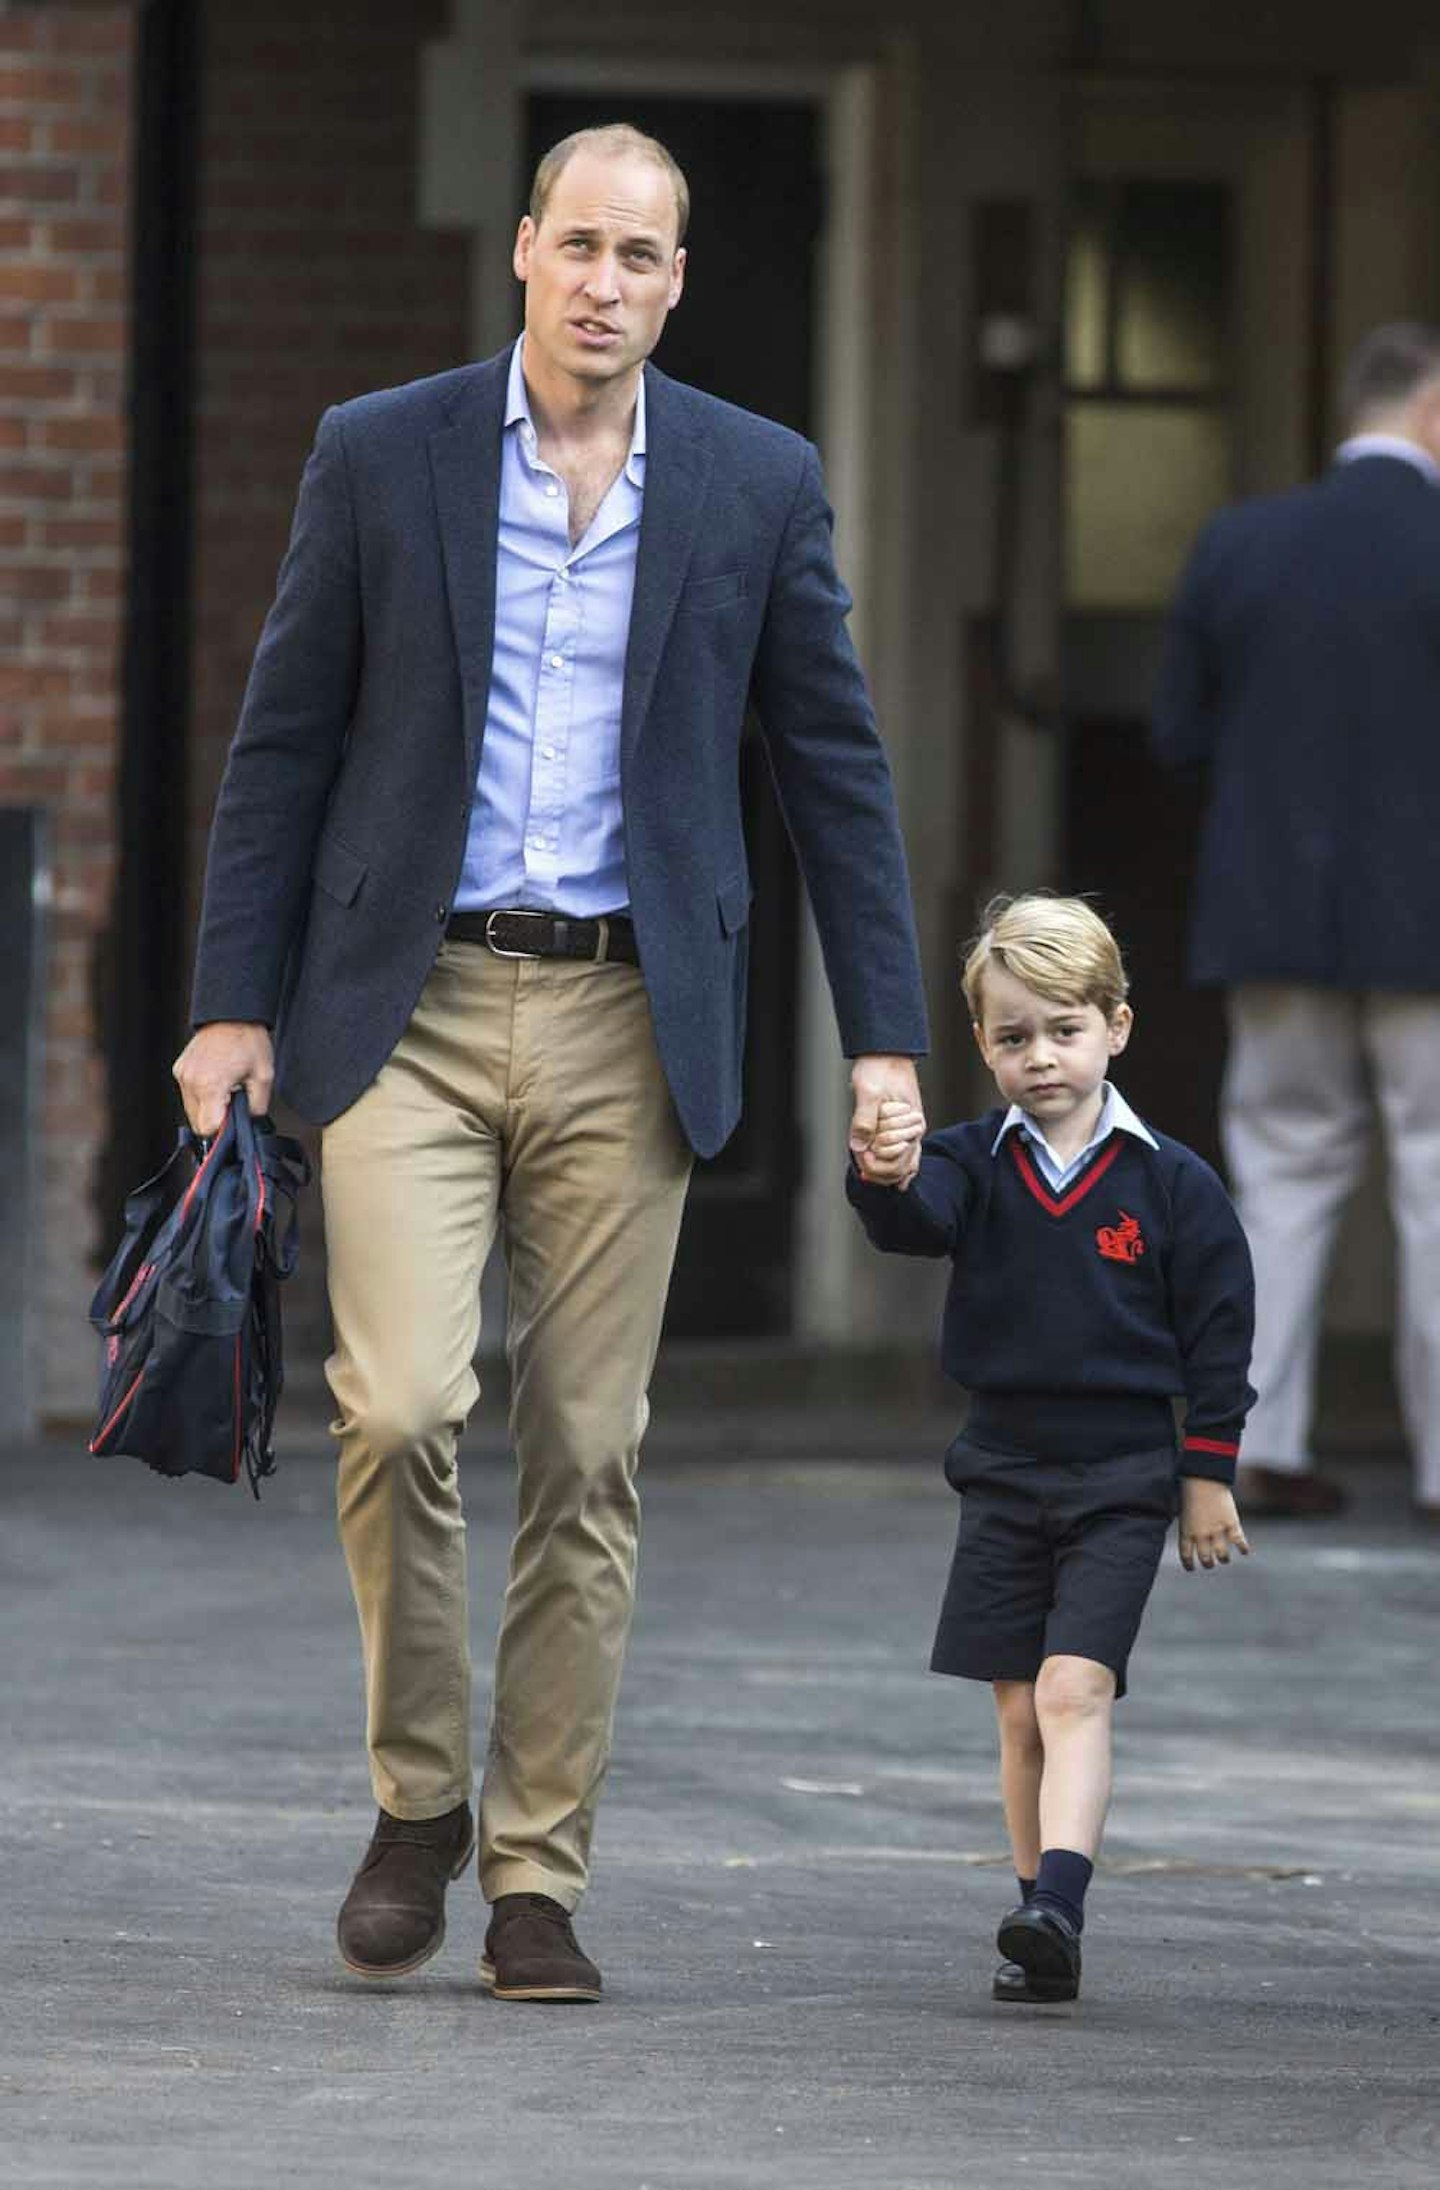 Prince William with his son Prince George